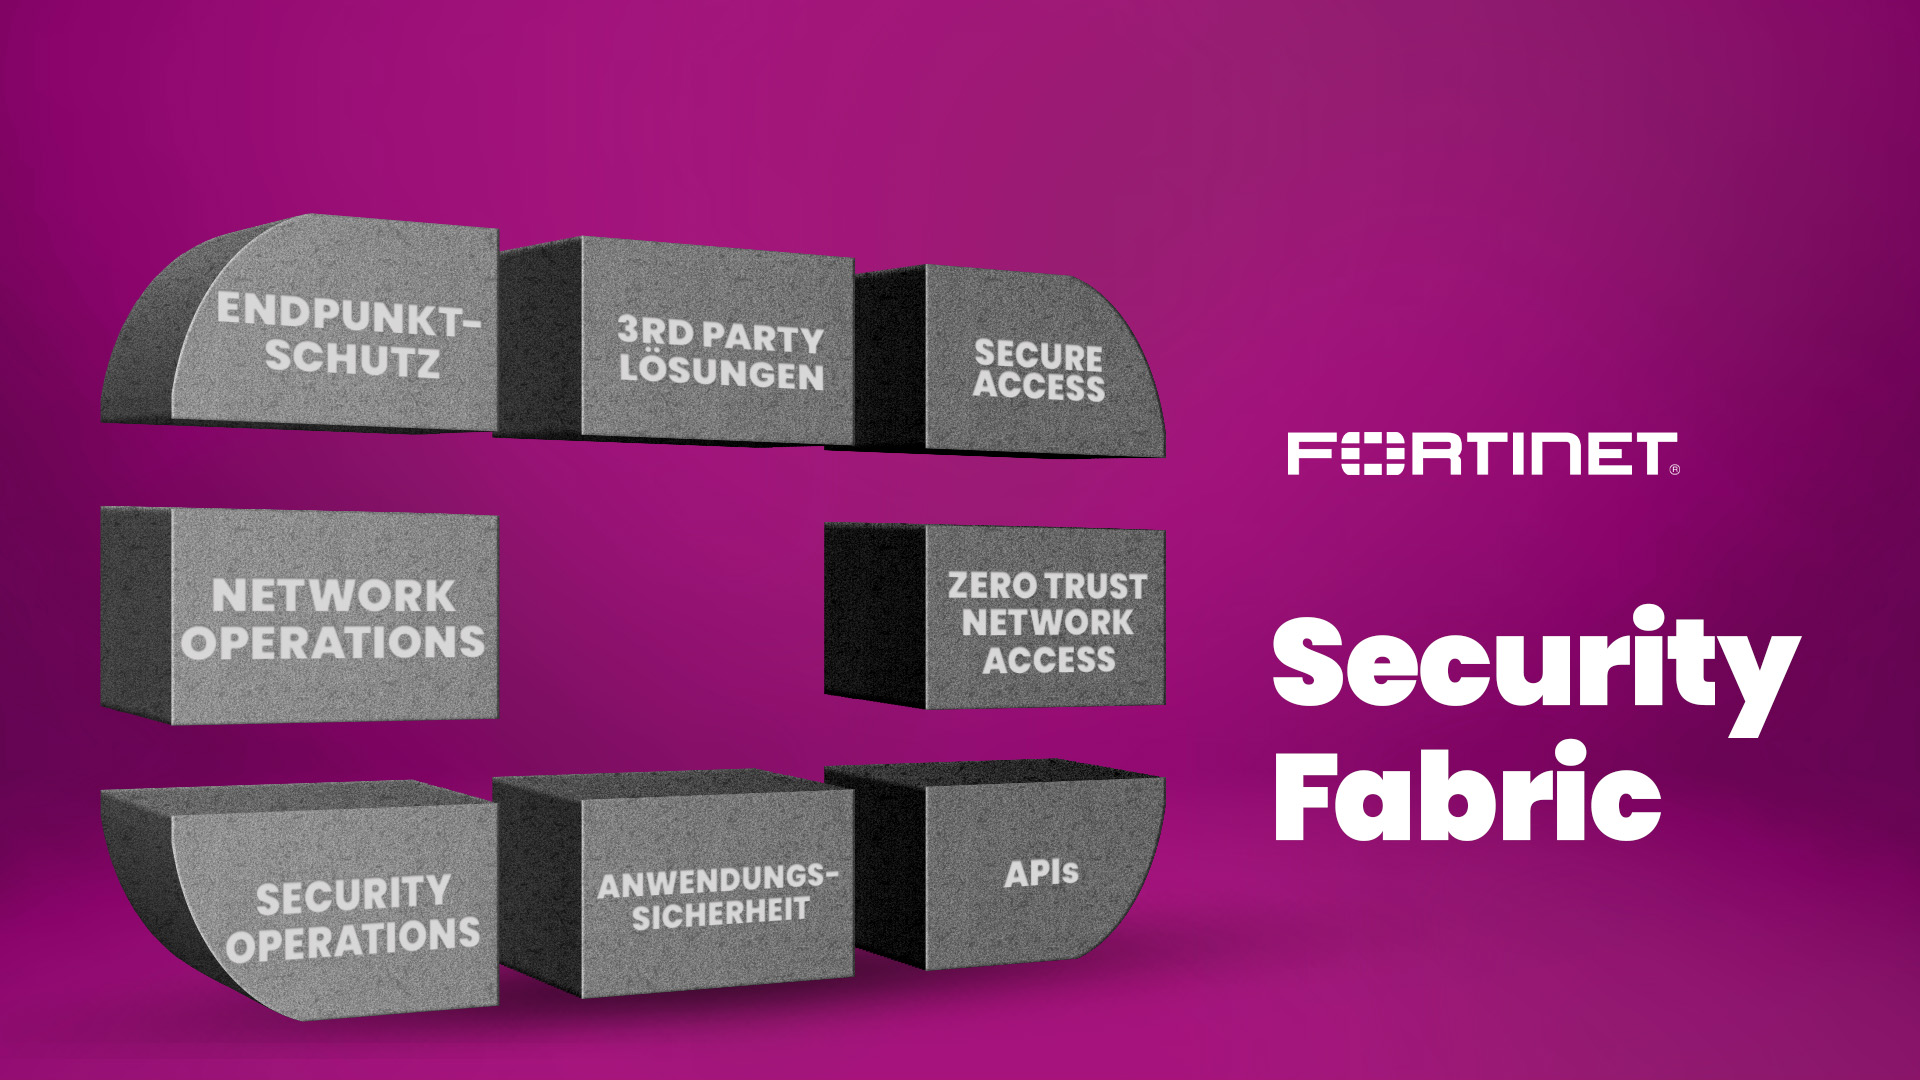 Fortinet Security Fabric 